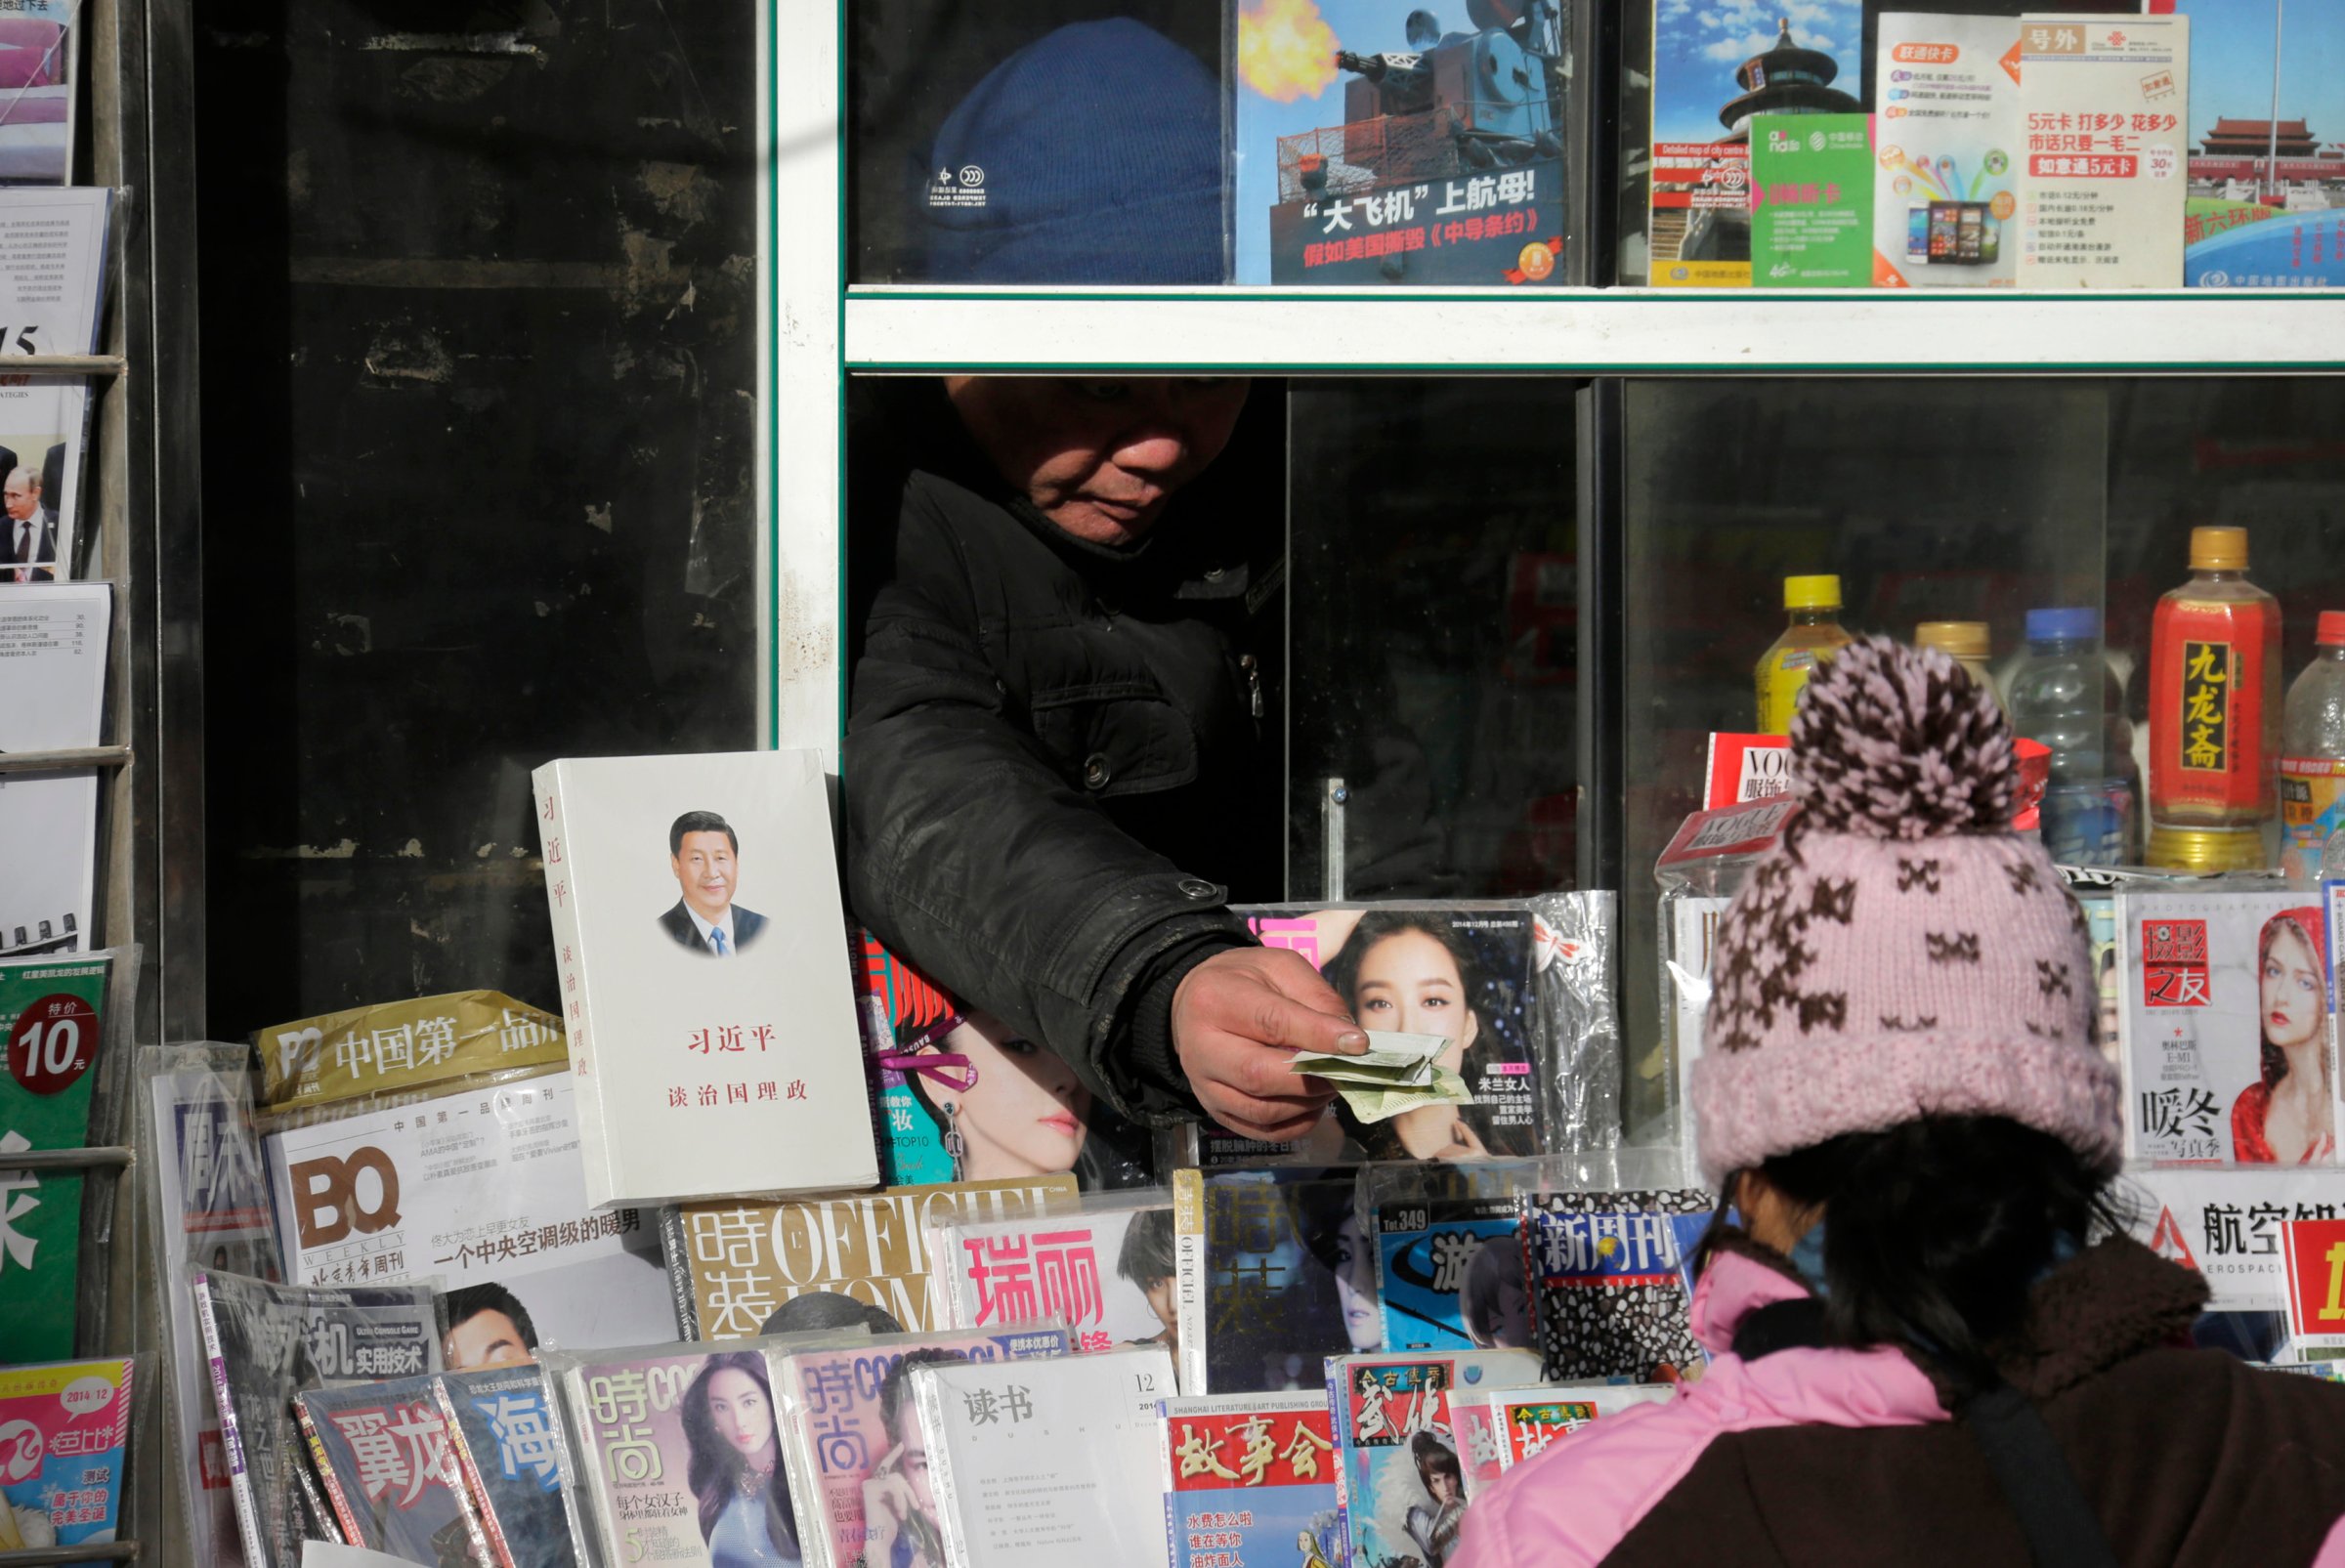 A newsstand vendor returns change to a customer near a book titled "Xi Jinping: The governance of China" displayed on sale in central Beijing